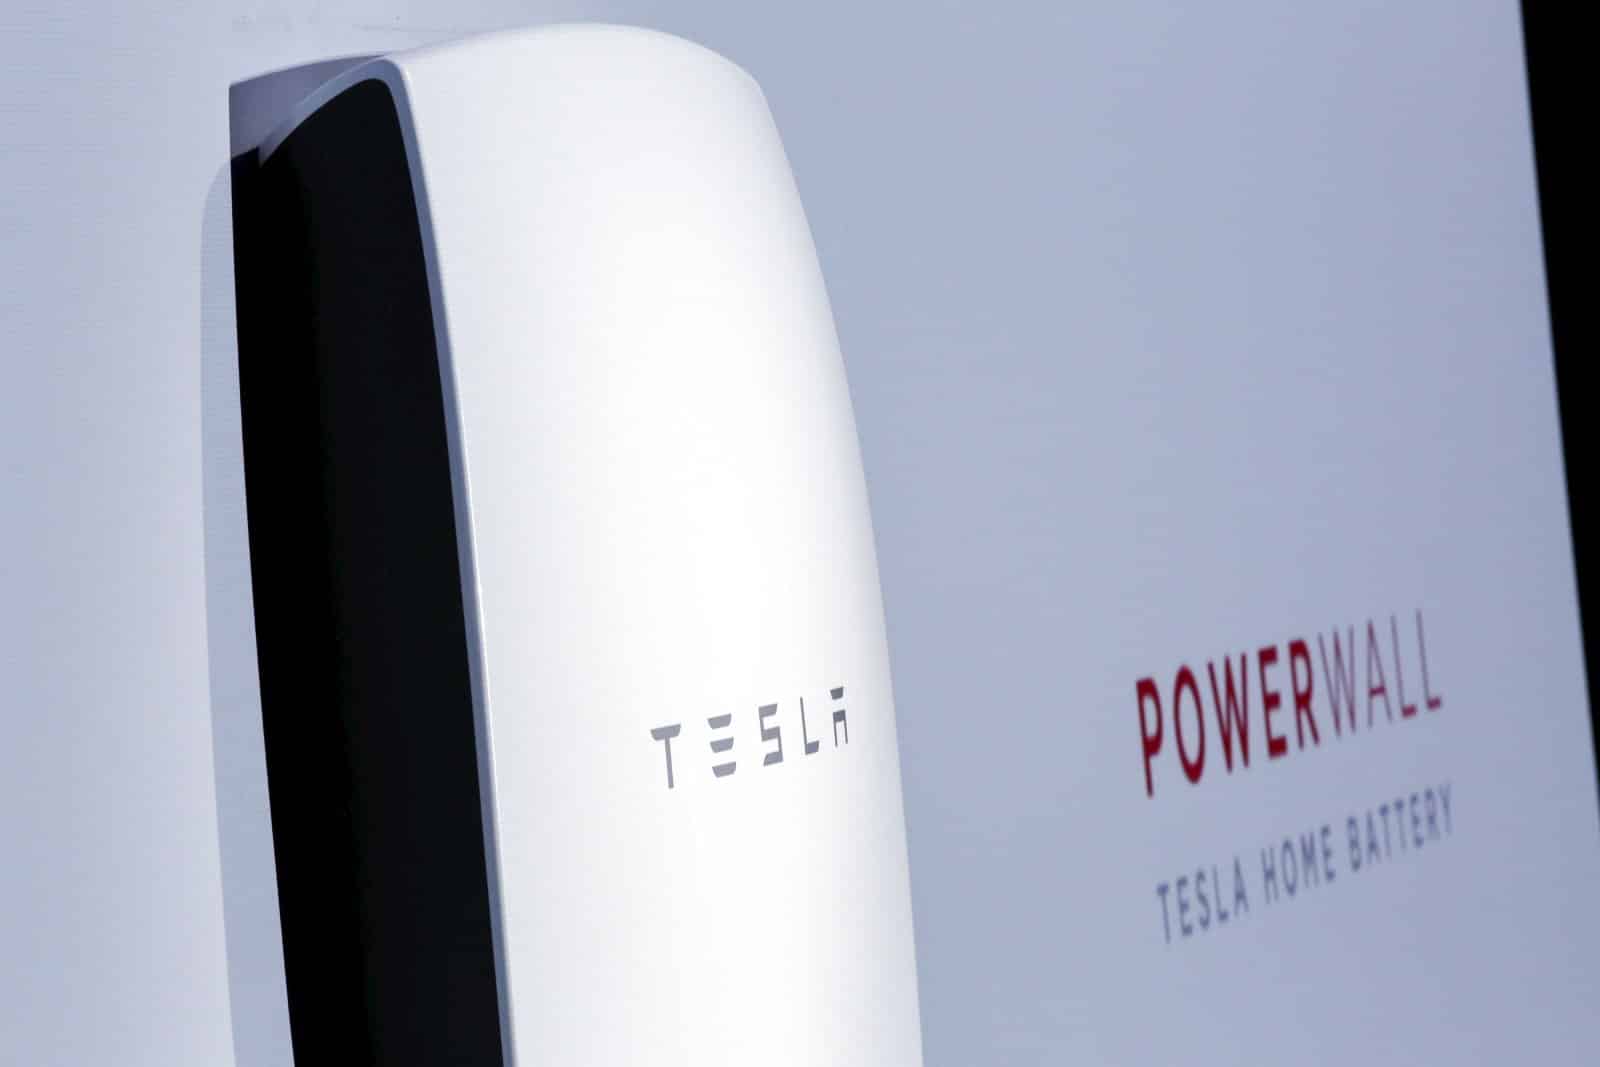 Powerall Home Battery Installations to be Started by Tesla in Japan